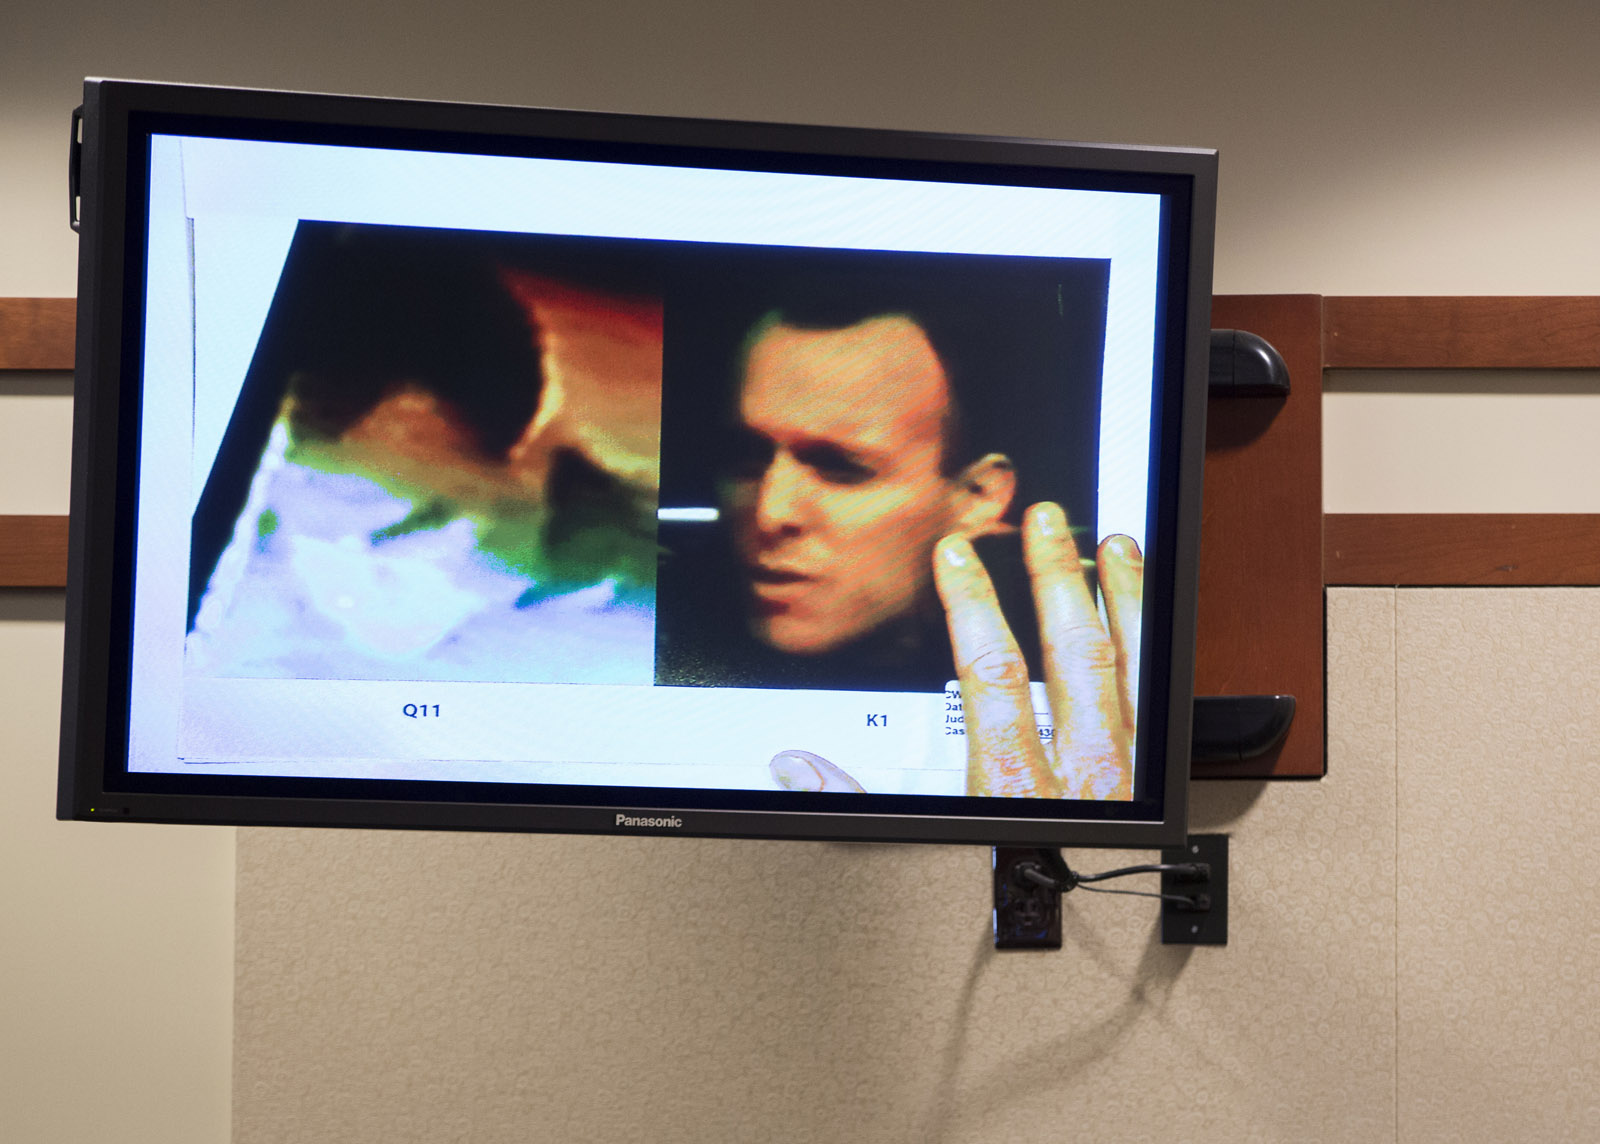 A photograph of Charles Severance, right, is shown next to an image of a man taken from surveillance video leaving a Target store the day Nancy Dunning was murdered, is shown on a monitor during a murder trial in Fairfax County Circuit Court on Friday, Oct. 16, 2015, in Fairfax, Va.  Severance is accused of three murders over the course of a decade in Alexandria, Va. (AP Photo/Evan Vucci, Pool)